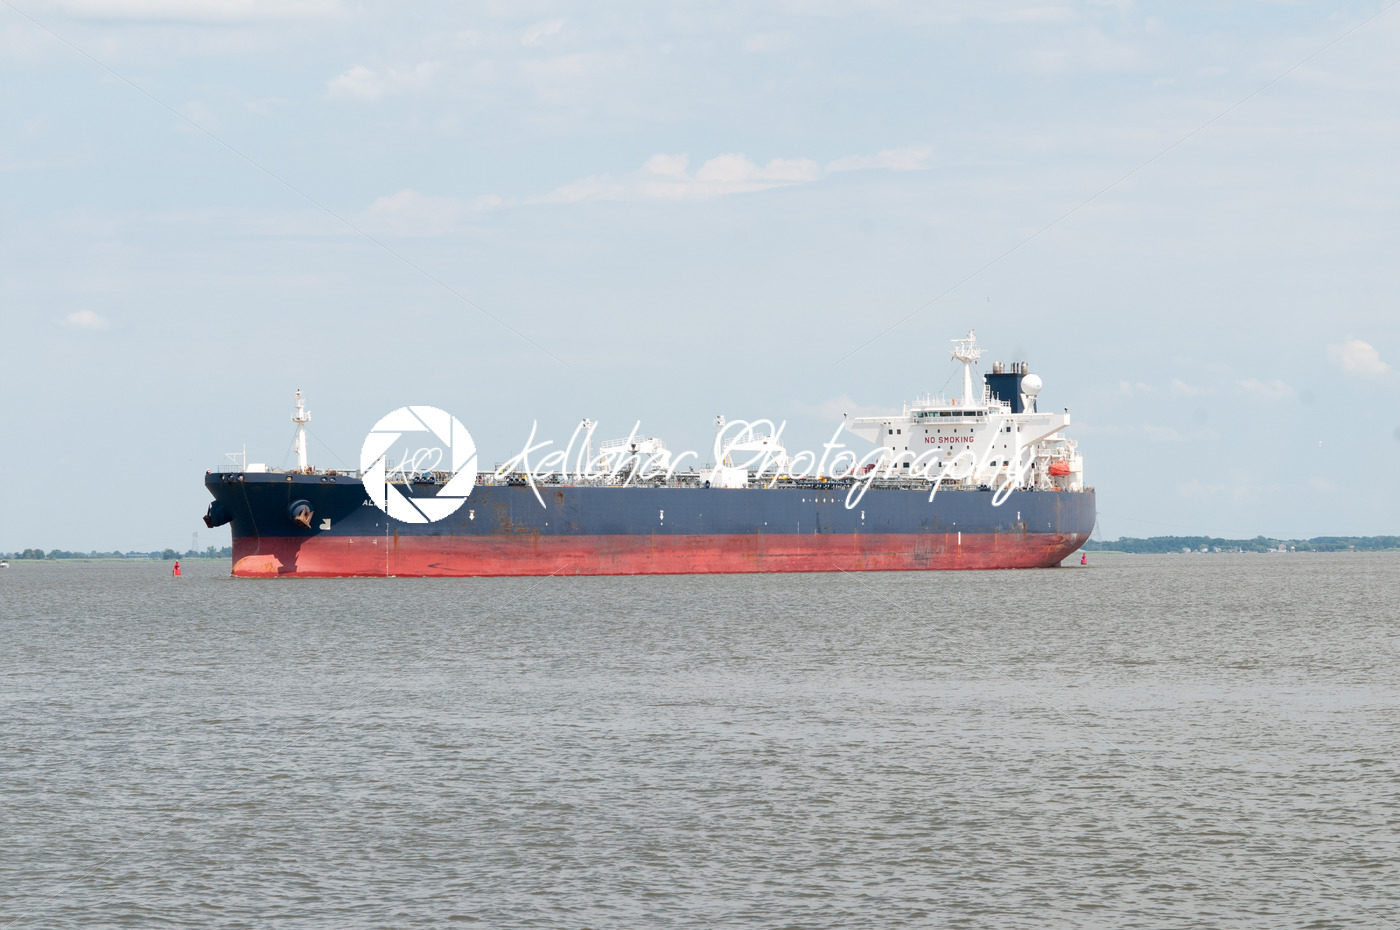 DELAWARE CITY, DE – AUGUST 1: Oil tanker ship coming into port on Delware river on a background of blue sky on August 1, 2015 - Kelleher Photography Store